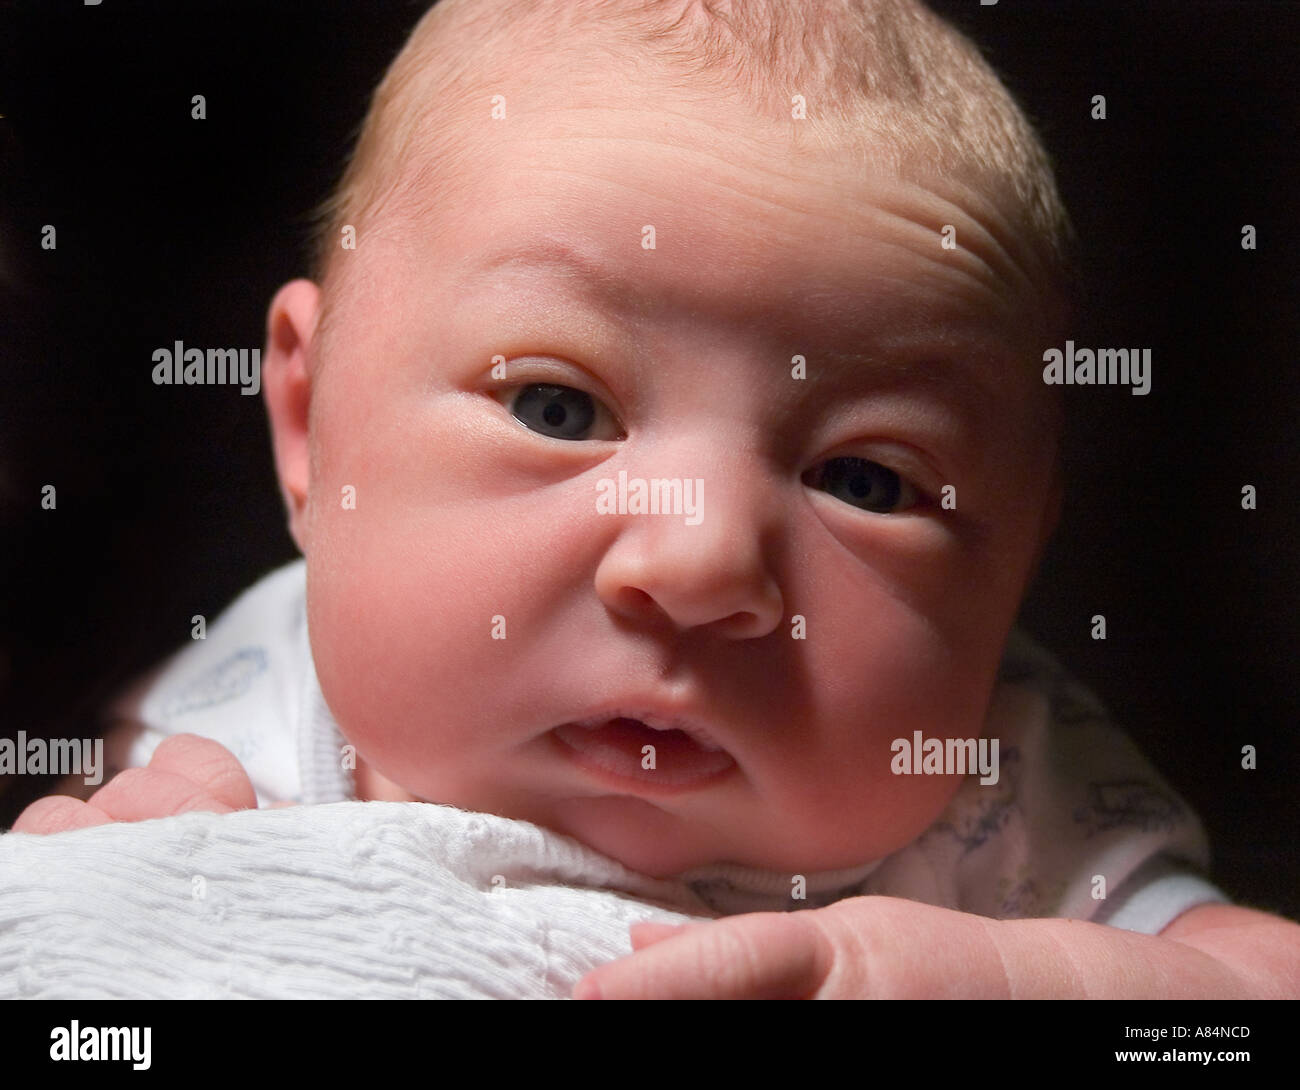 A newborn baby boy poses for a photo during his first day in the world Stock Photo